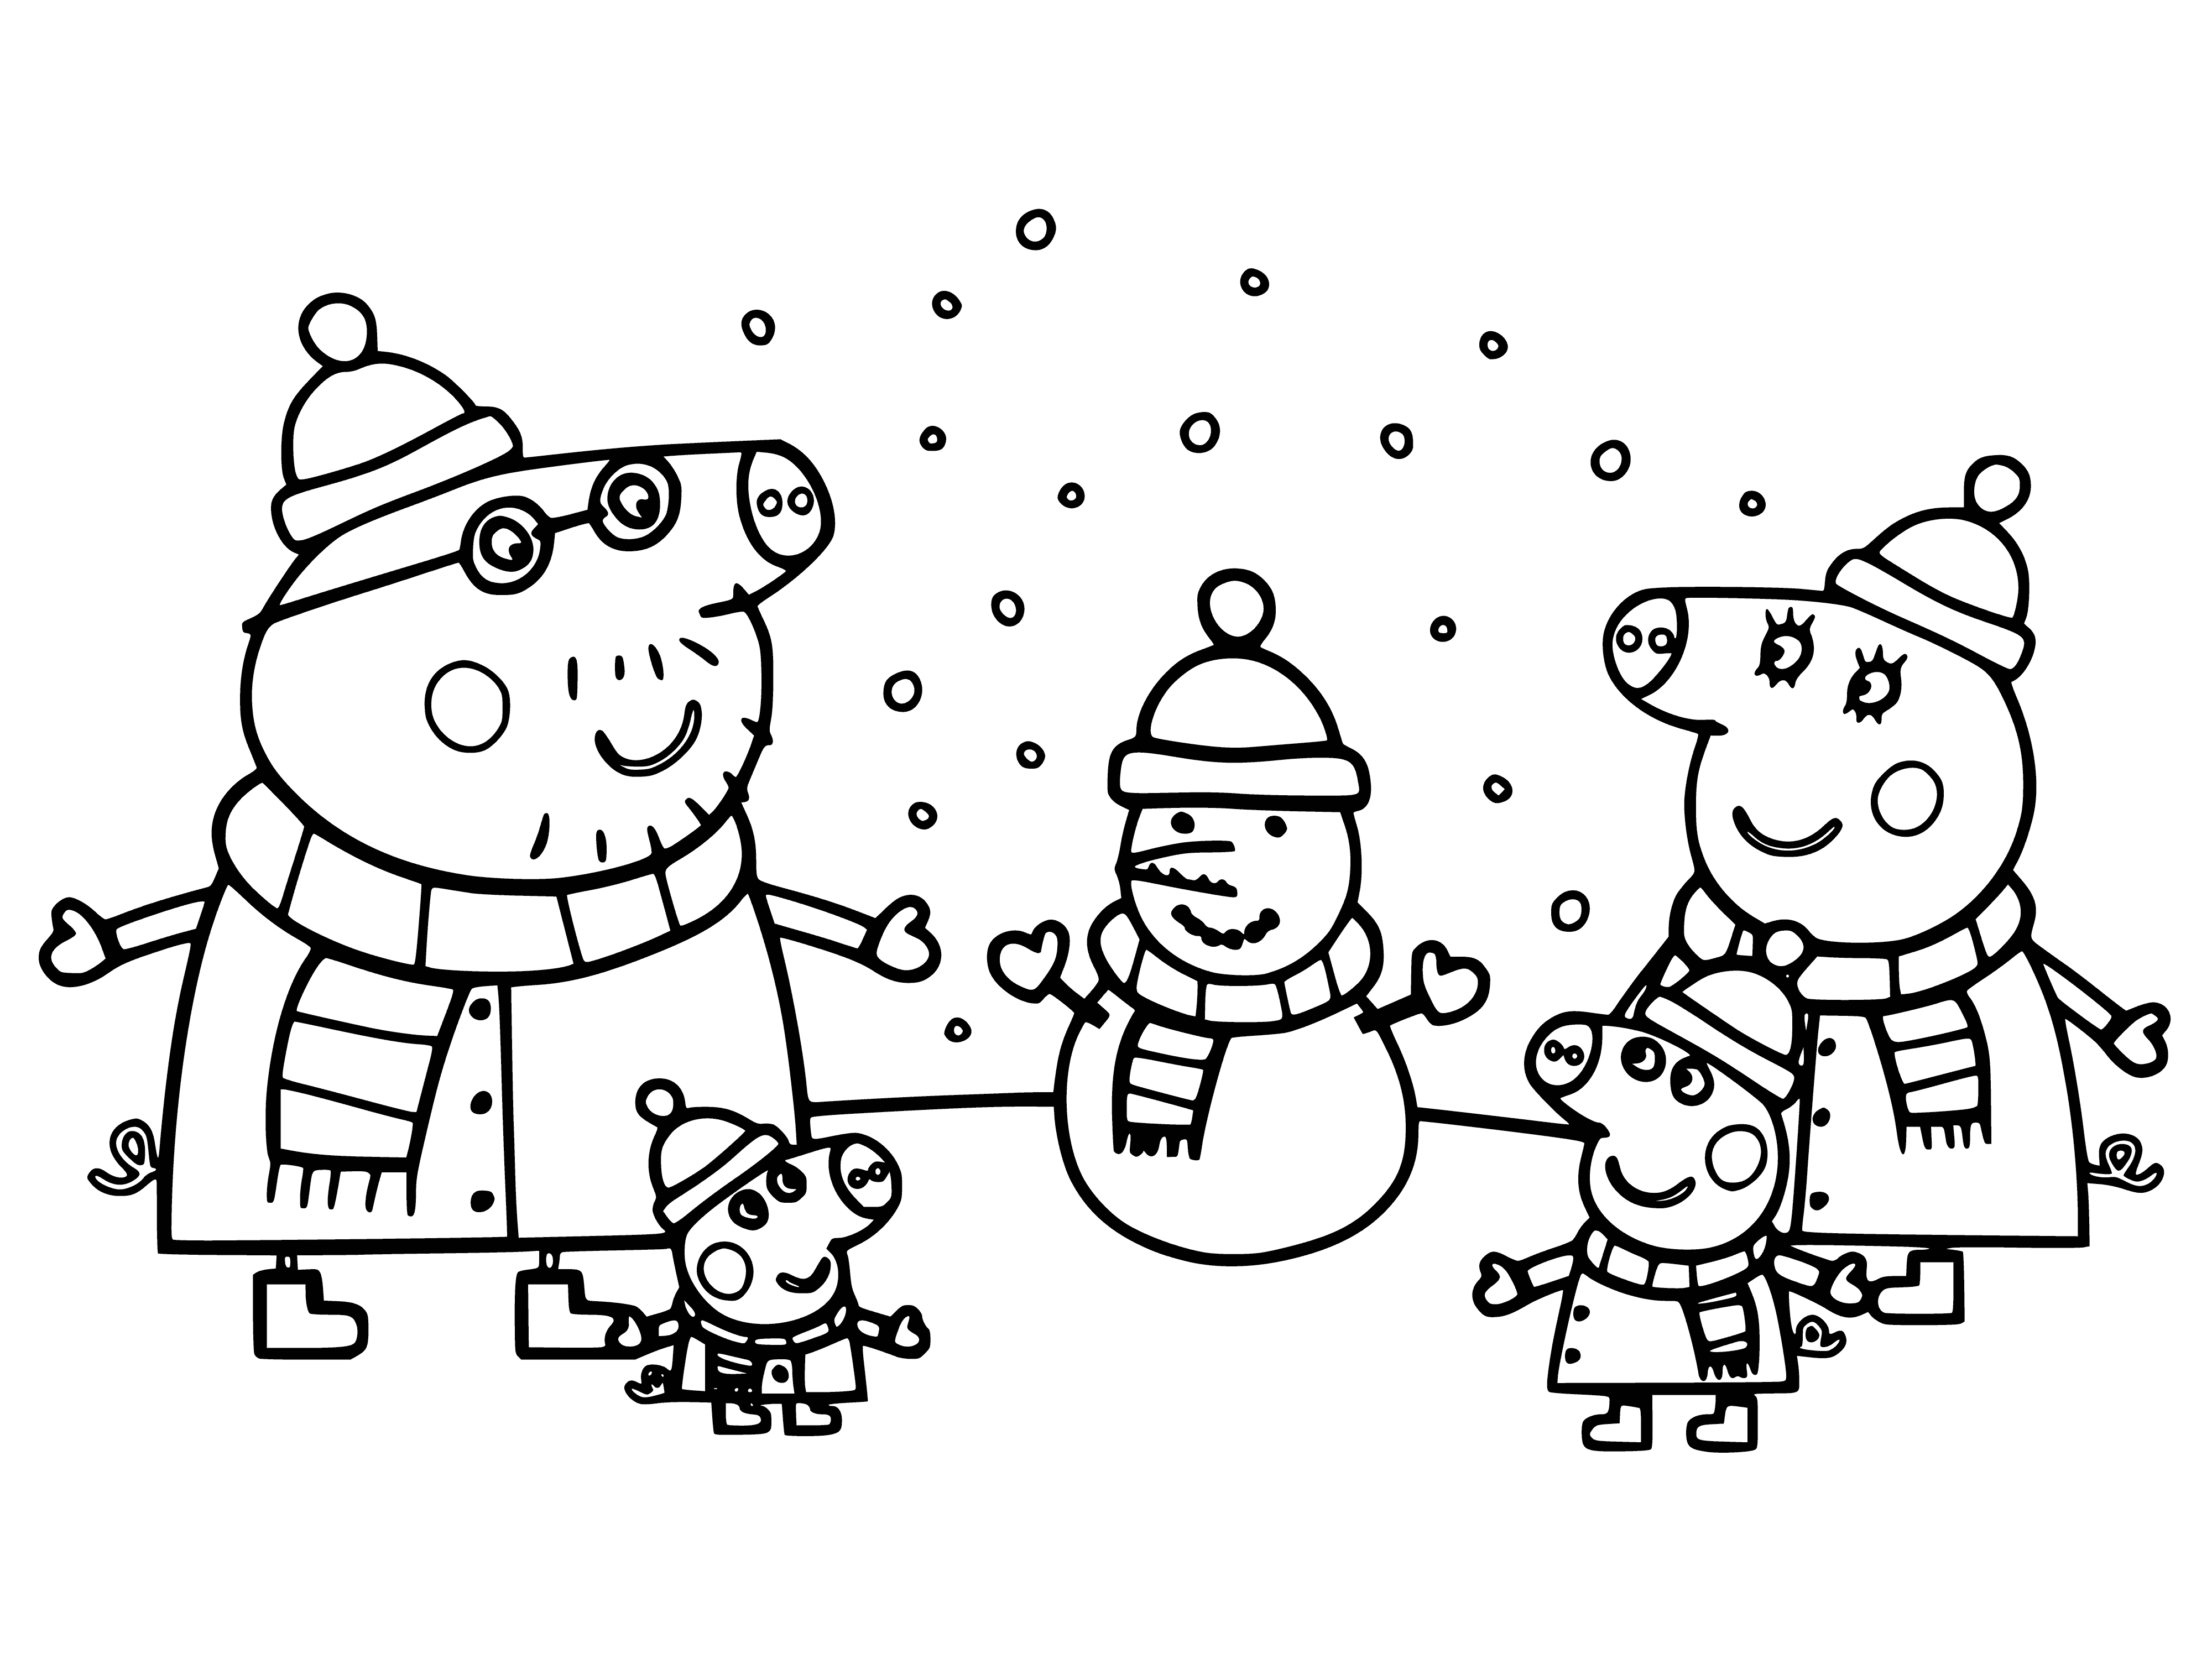 coloring page: Family of pigs make snowman w/carrot nose and stick arms - all wearing winter clothes!